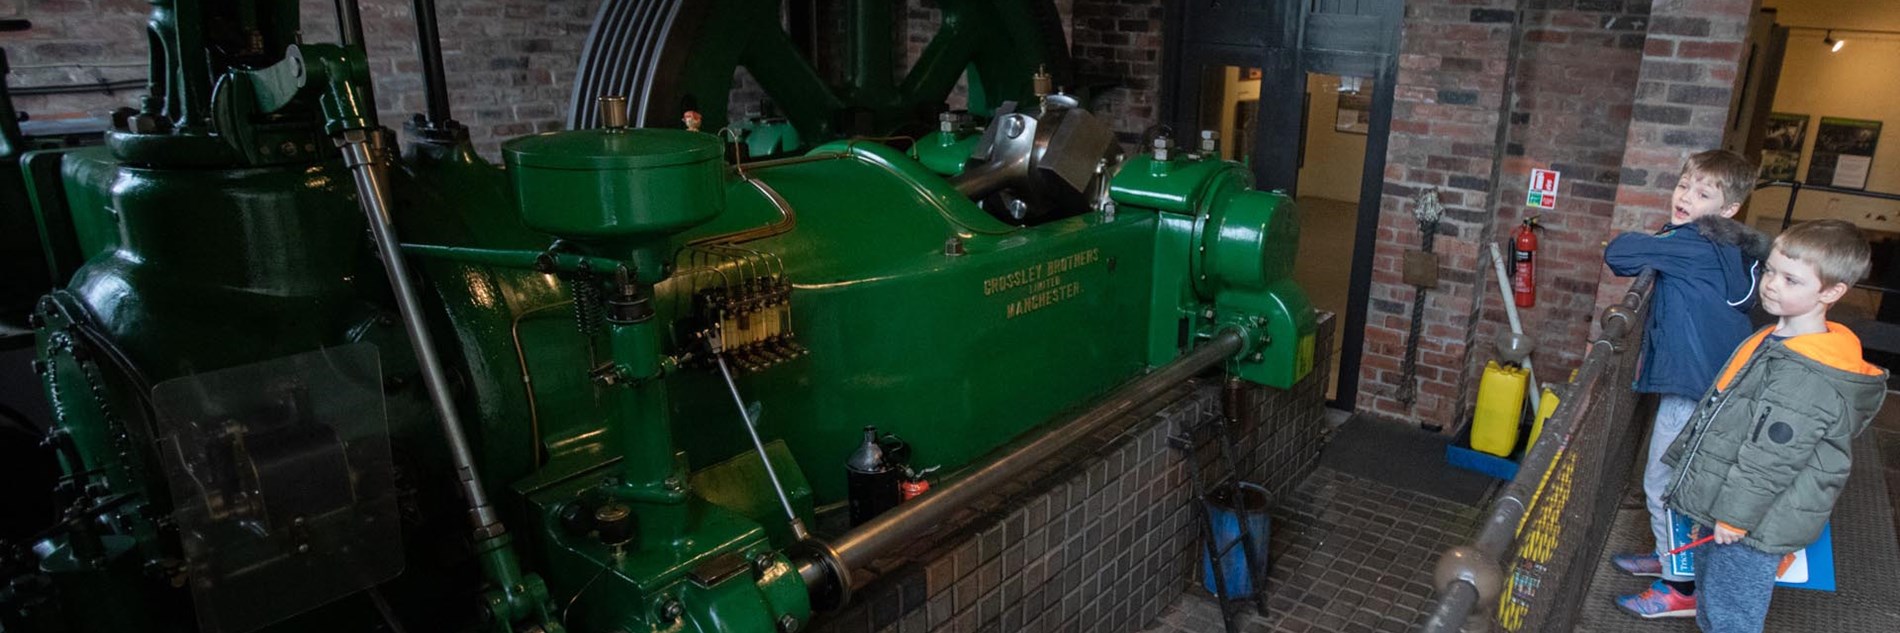 A restored working gas engine painted bright green 